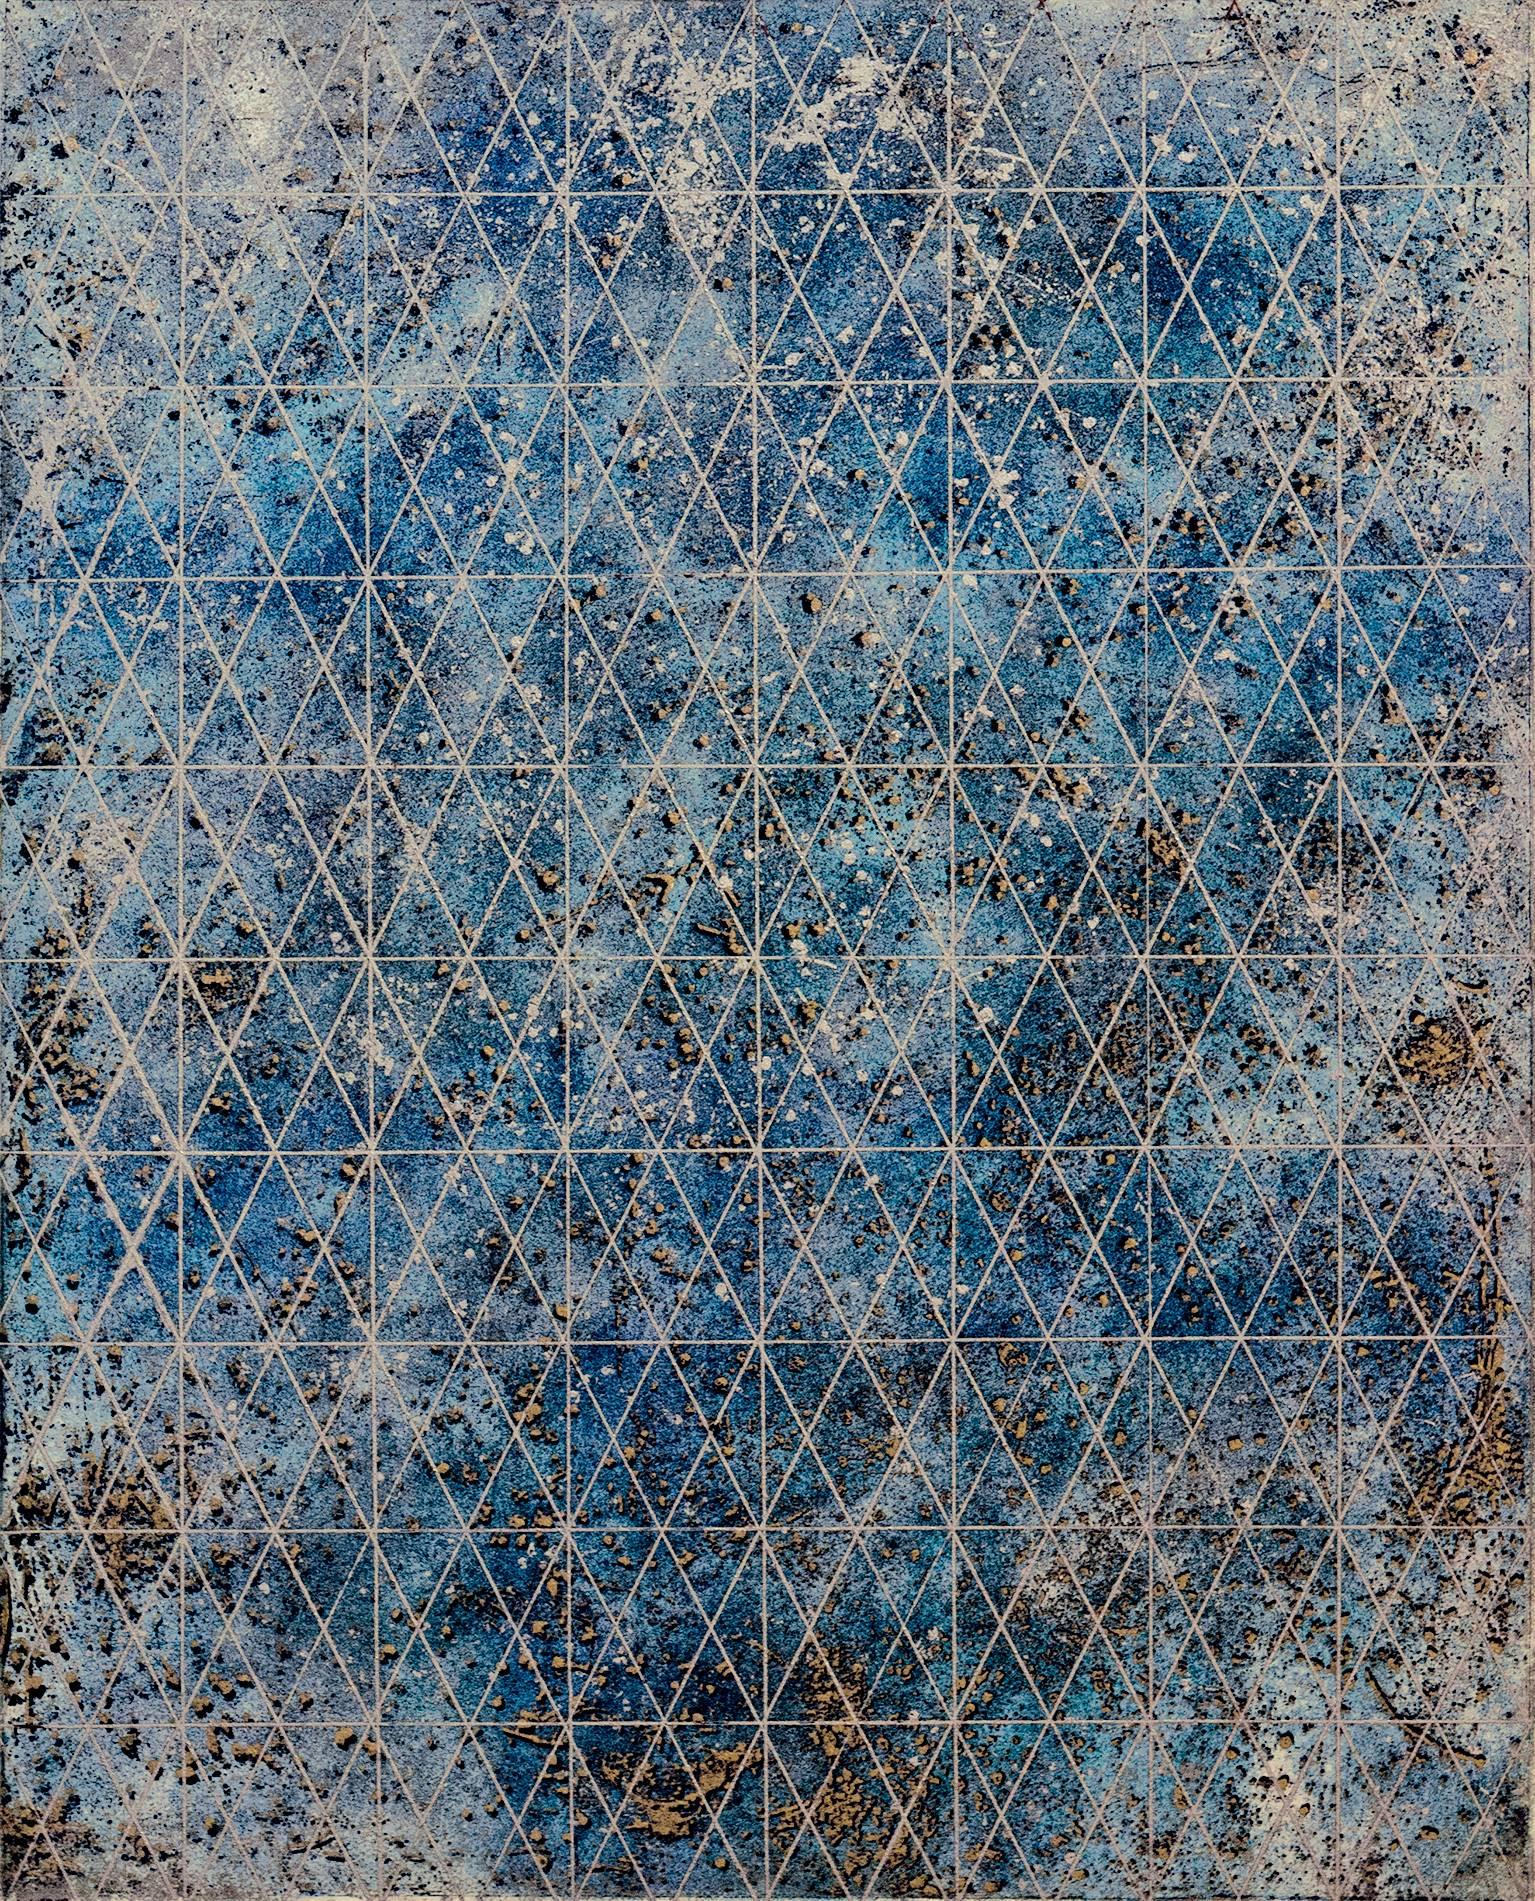 Arlene Slavin Abstract Print - "Intersection/Cosmos Five", abstract geometric print, blues, gold, silver grid.